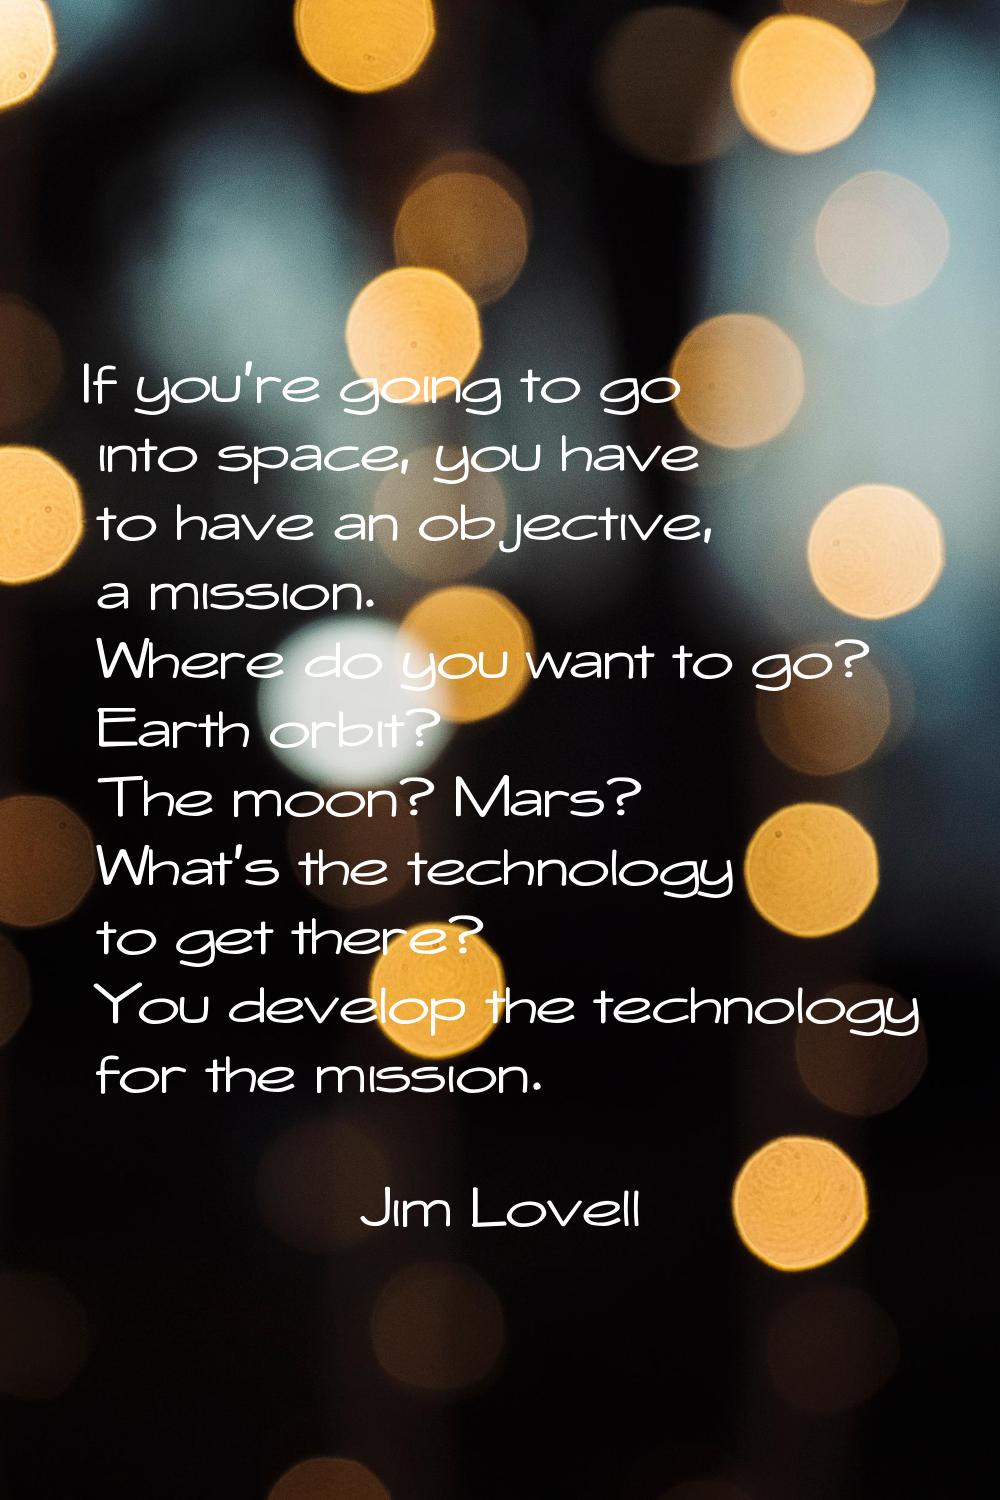 If you're going to go into space, you have to have an objective, a mission. Where do you want to go